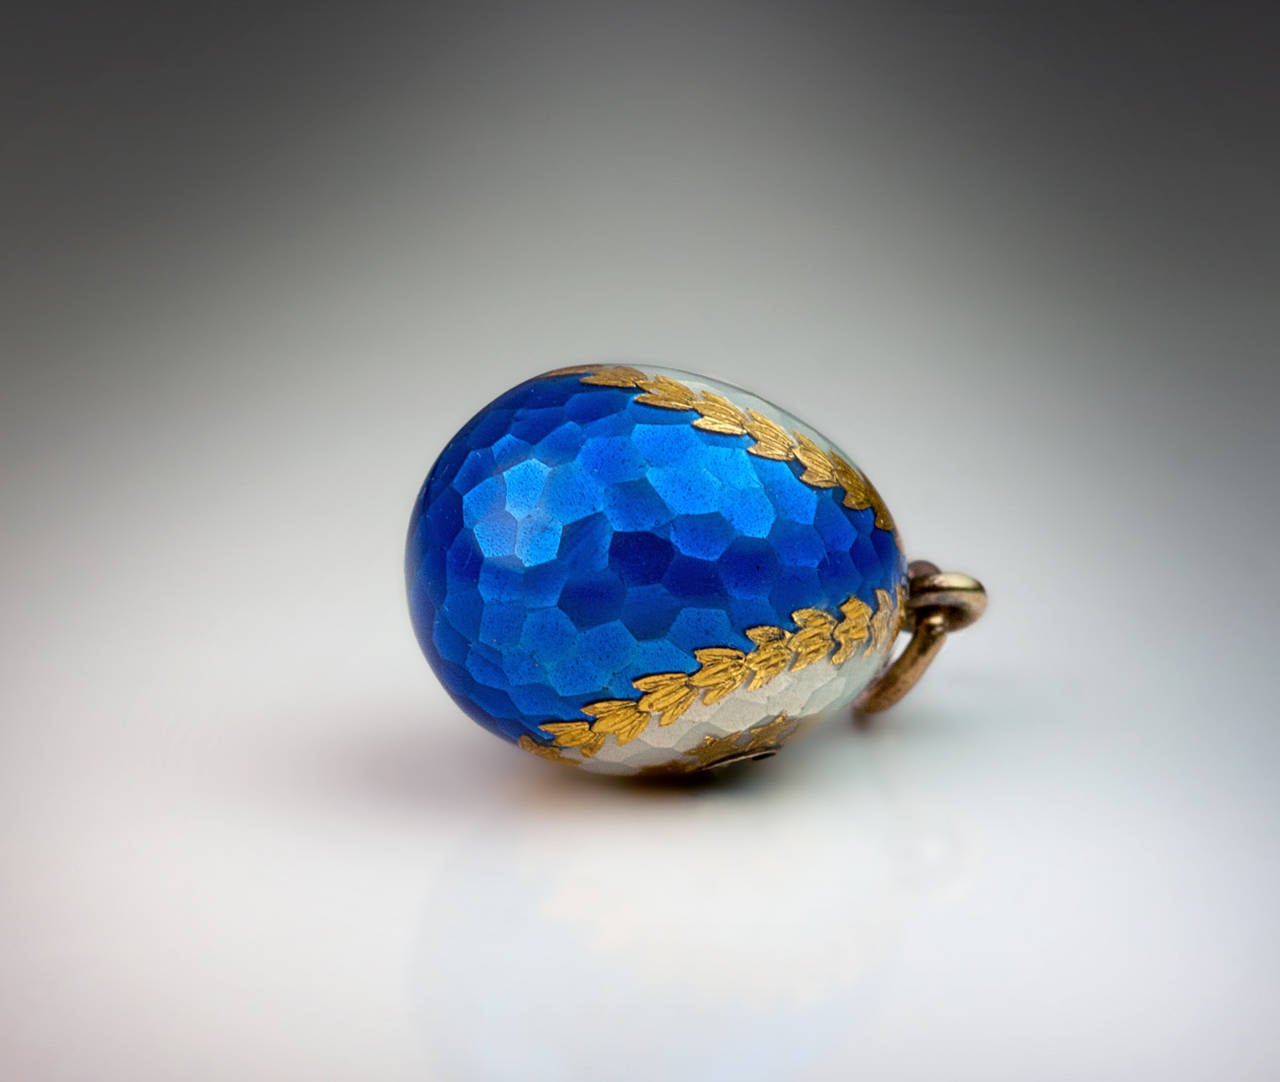 This very fine quality, elaborately decorated egg was made in Russia between 1899 and 1908. The surface texture of the egg is finished to resemble a hammered metal. The egg is covered with pearl white and royal blue translucent enamels separated